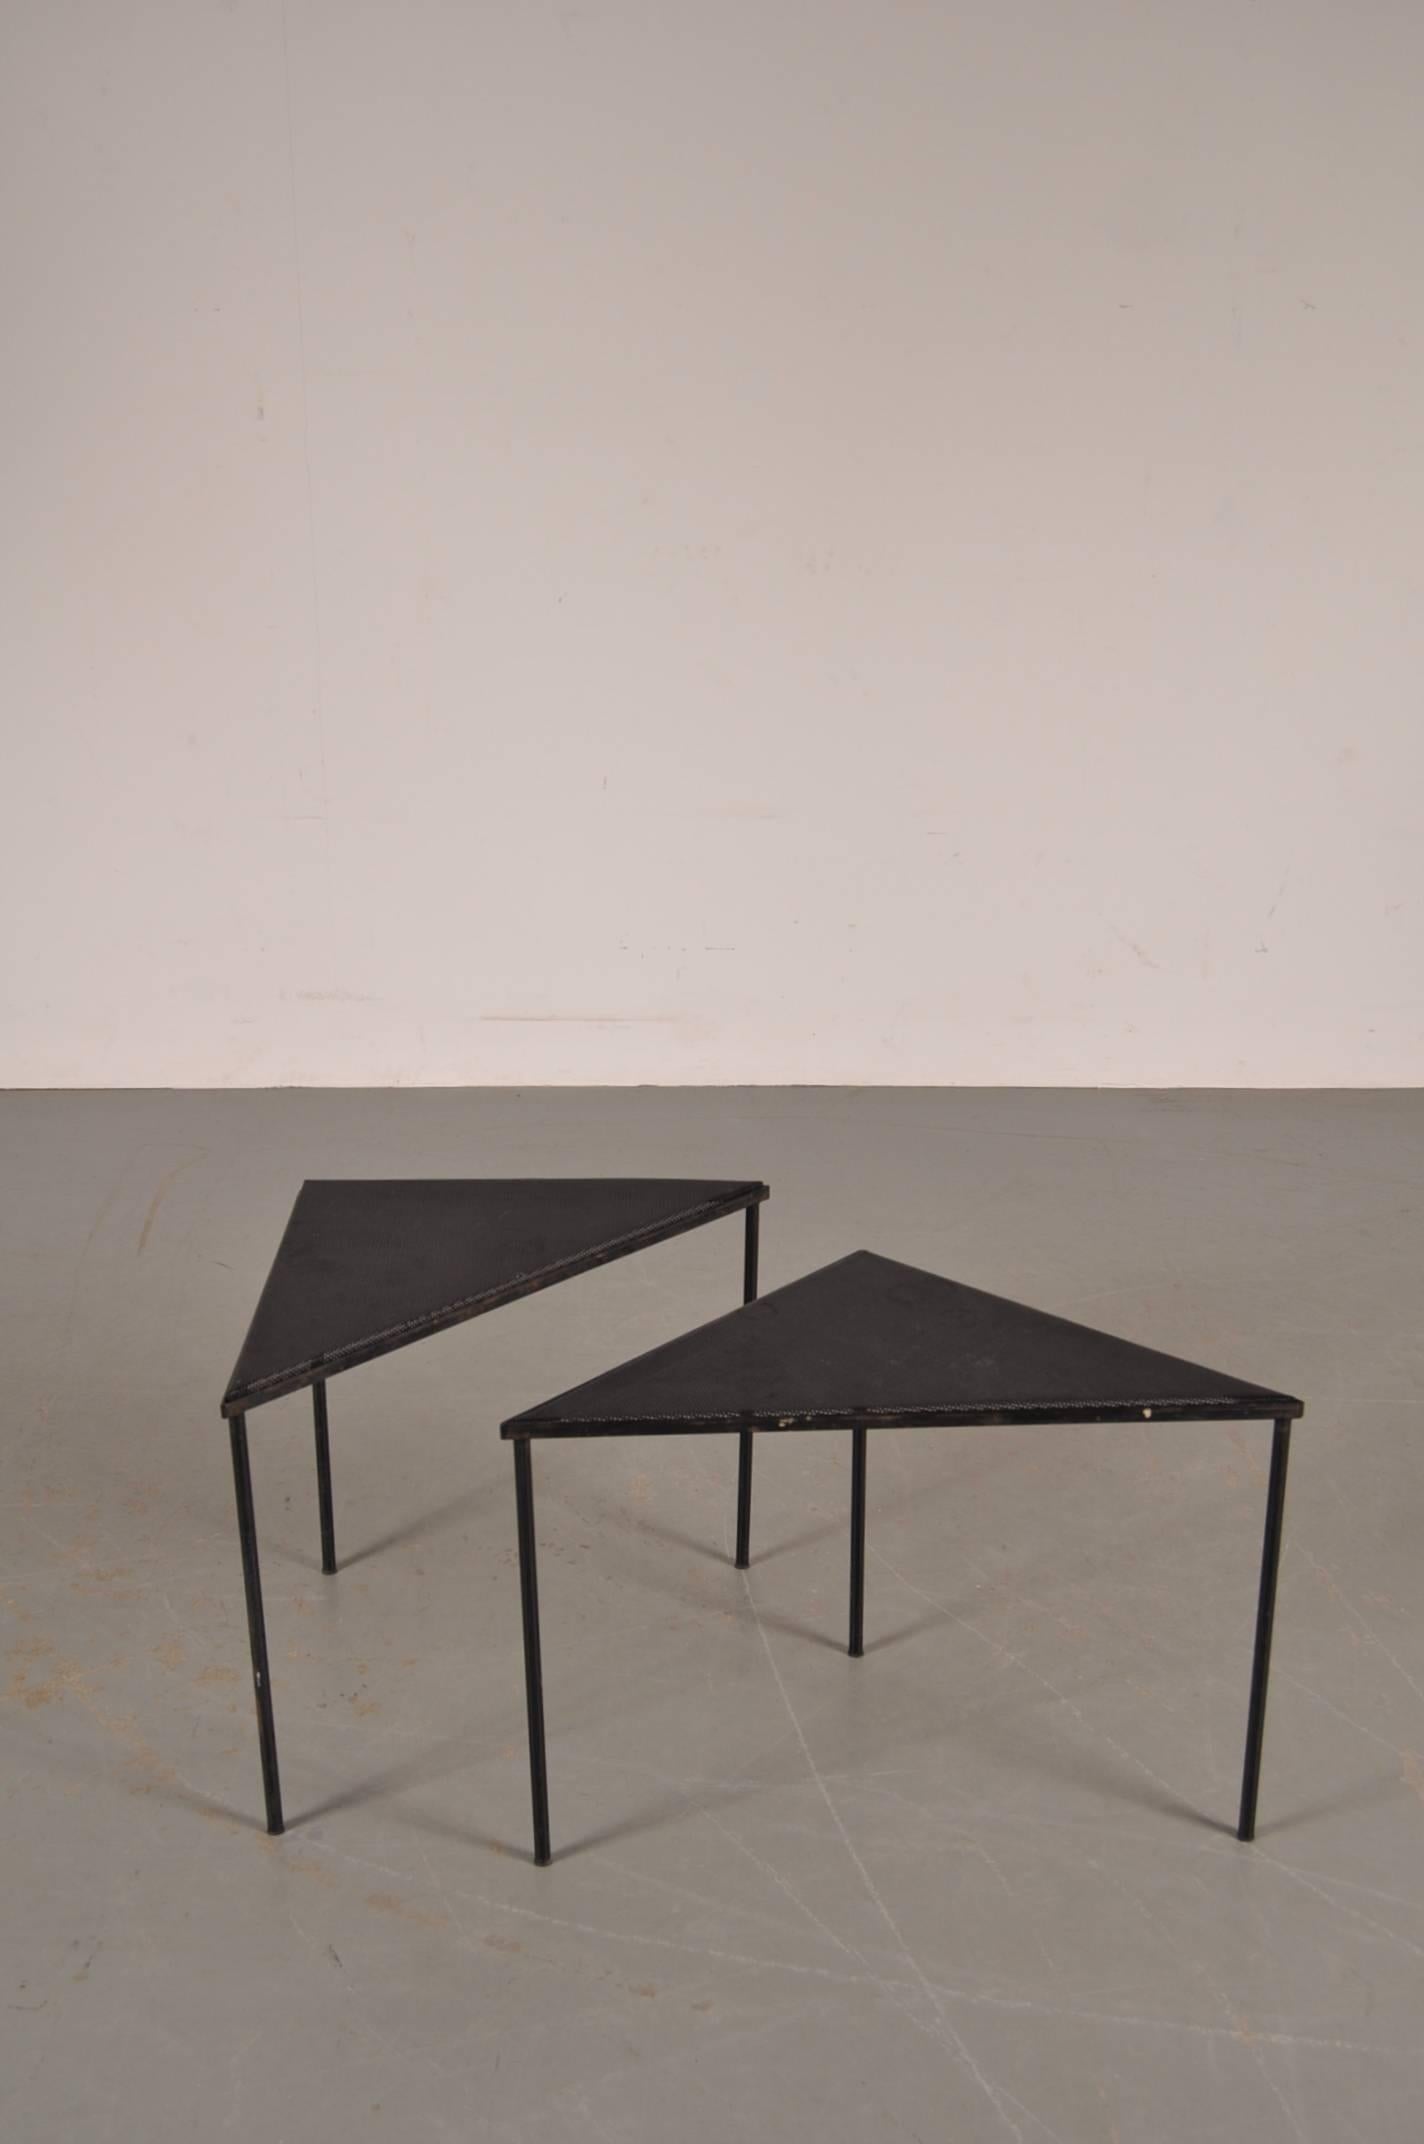 Metal Pair of Side Tables by Mathieu Mategot for Artimeta, The Netherlands, circa 1950